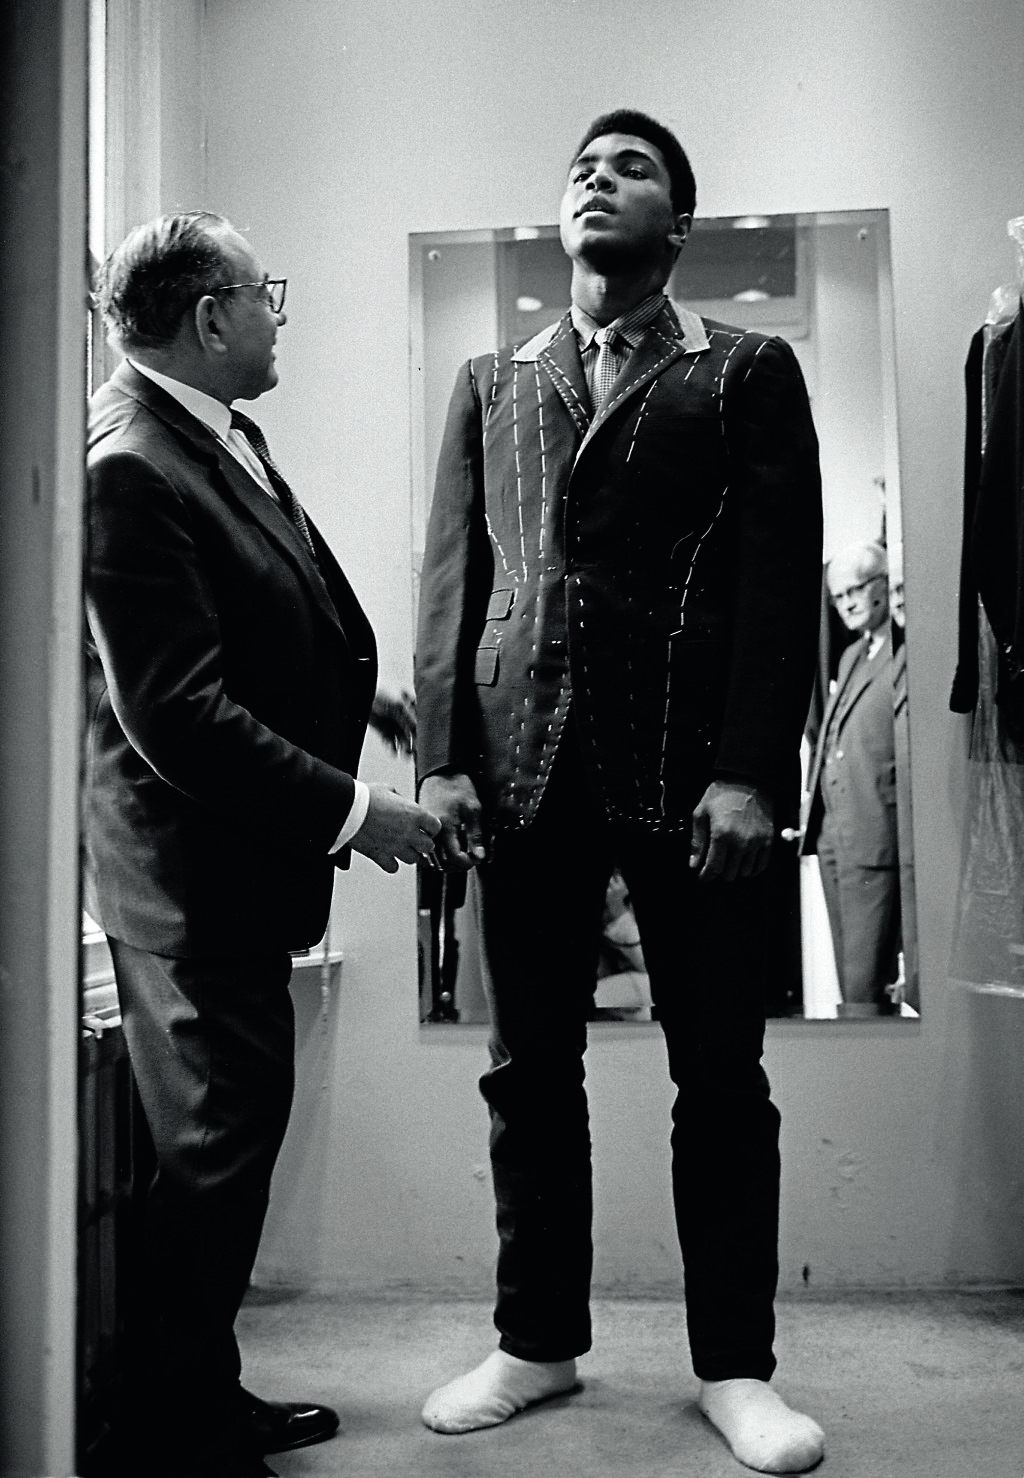 Muhammad Ali (then Cassius Clay), boxing world heavy weight champion at a taylor in London being fitted for a new suit. HOT1966015W02706-8A © Thomas Hoepker / MAGNUM